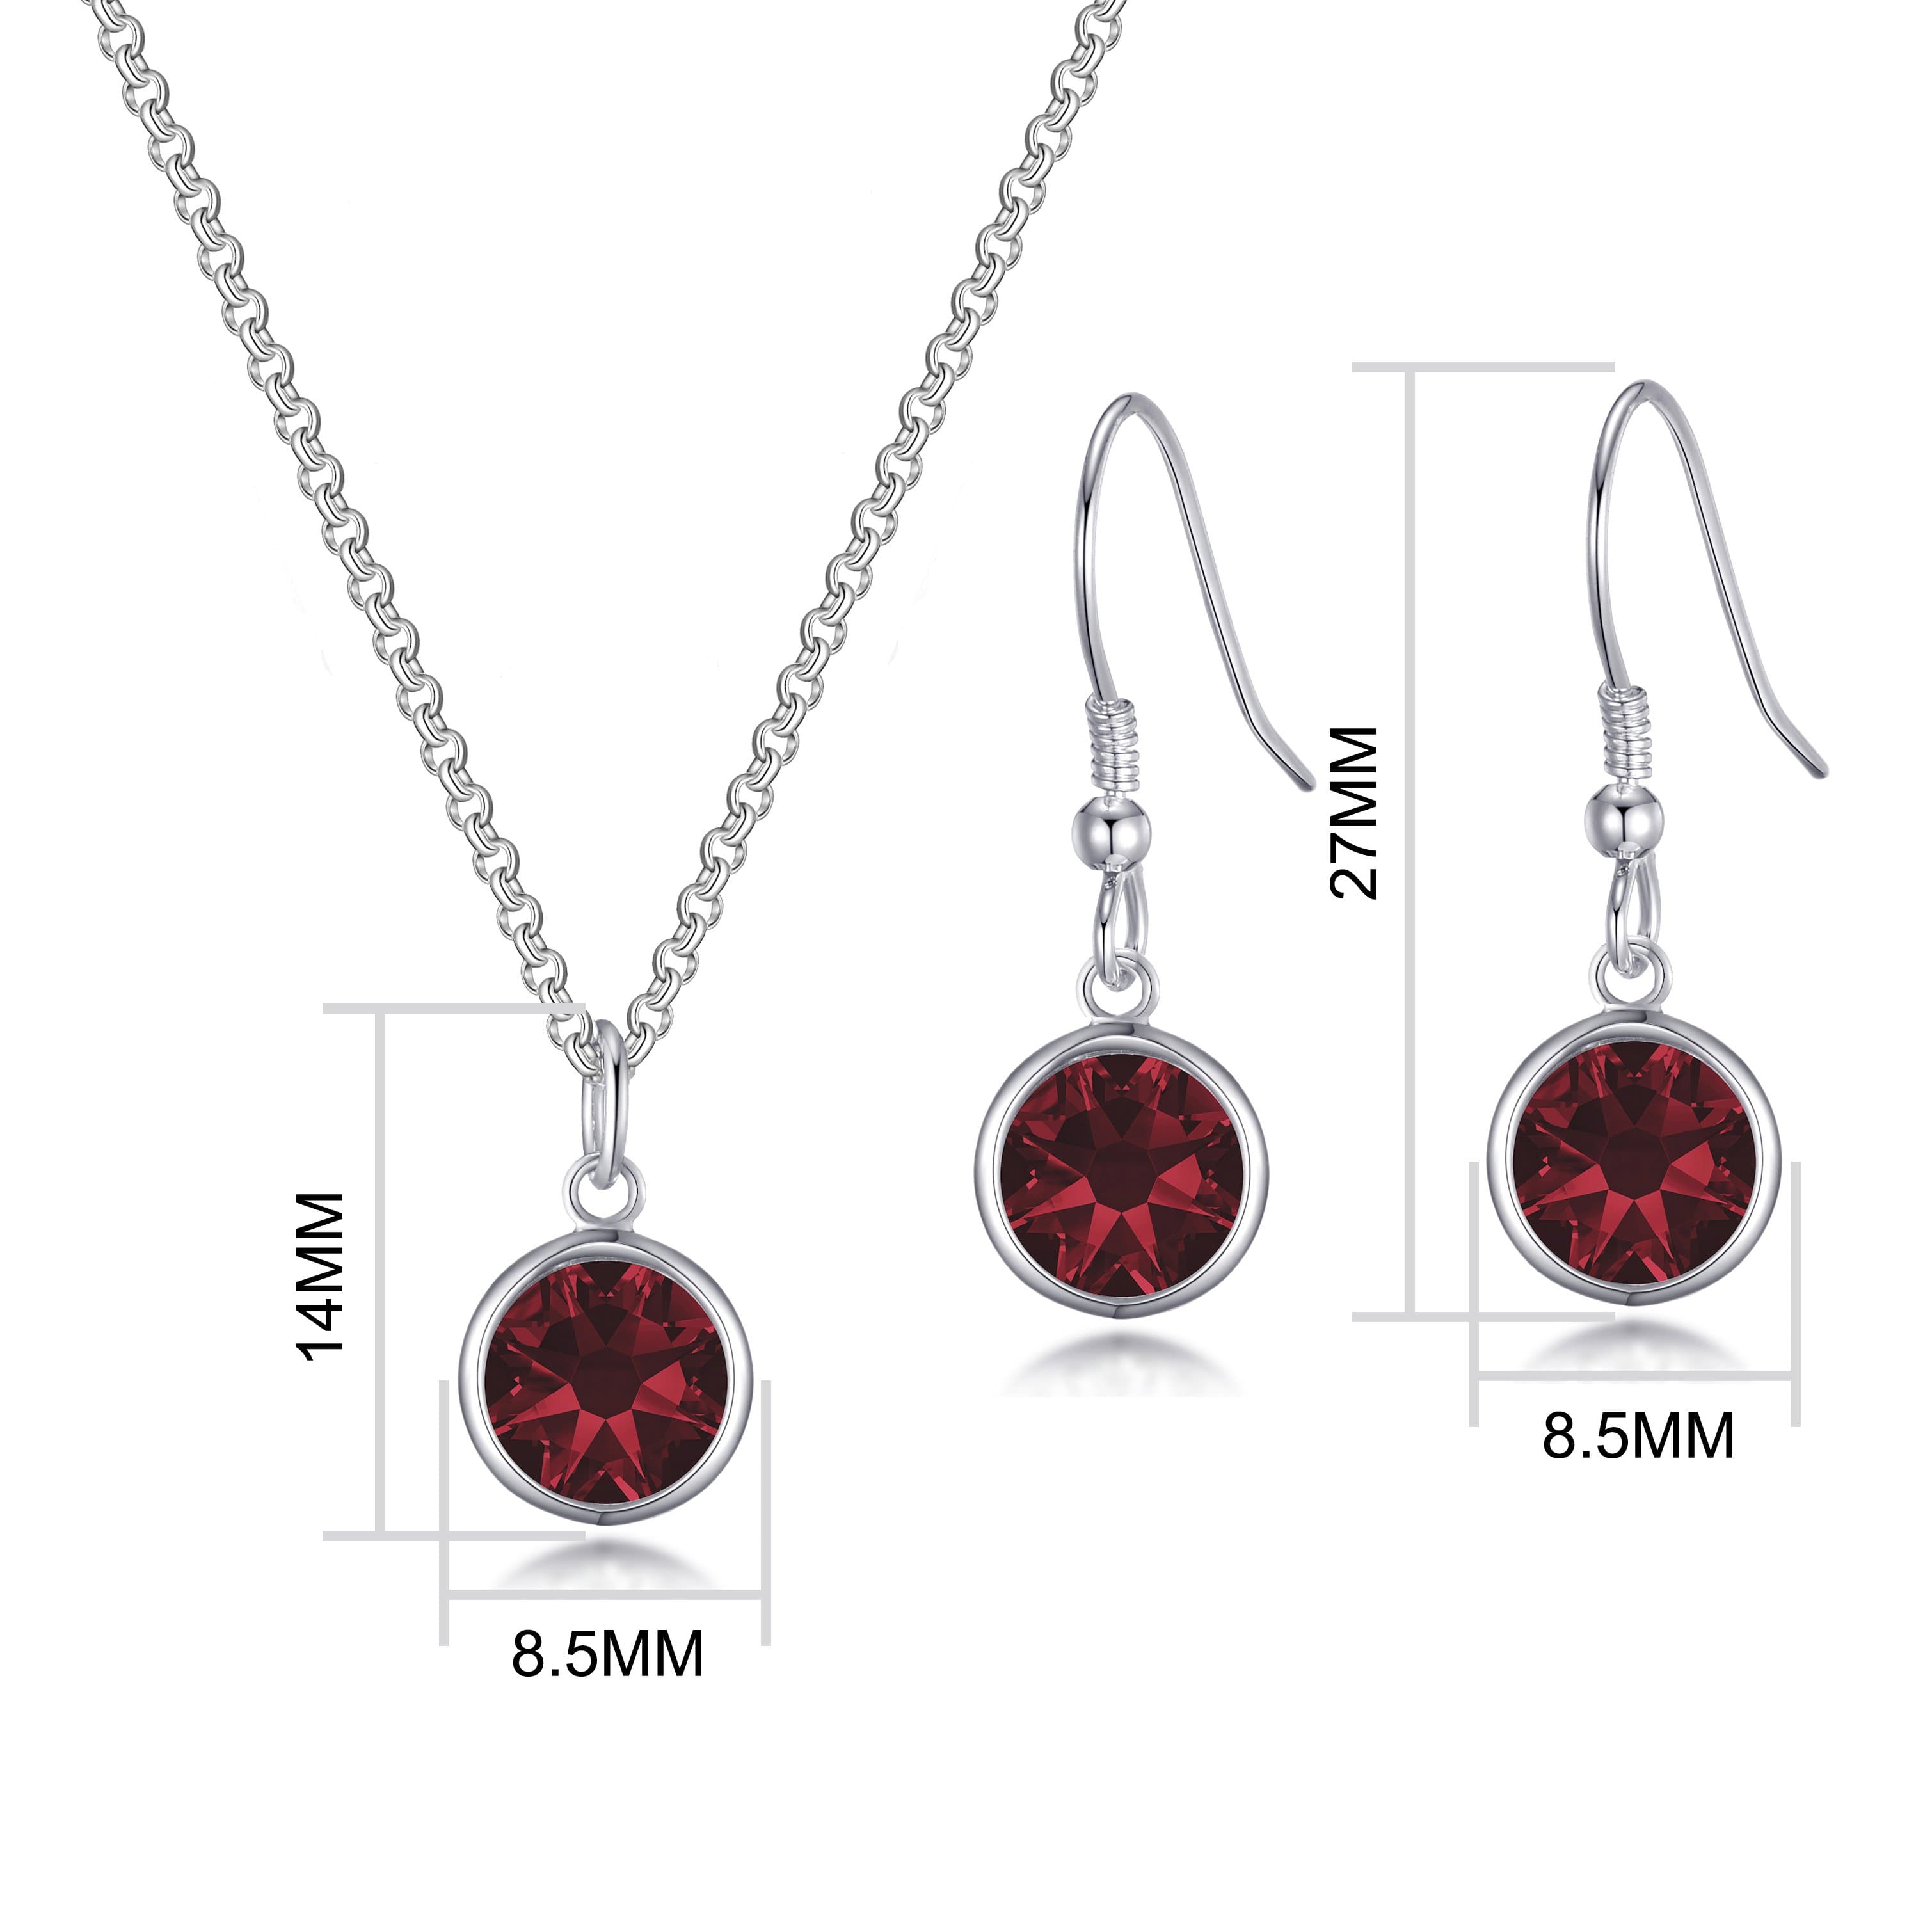 January (Garnet) Birthstone Necklace & Drop Earrings Set Created with Zircondia® Crystals